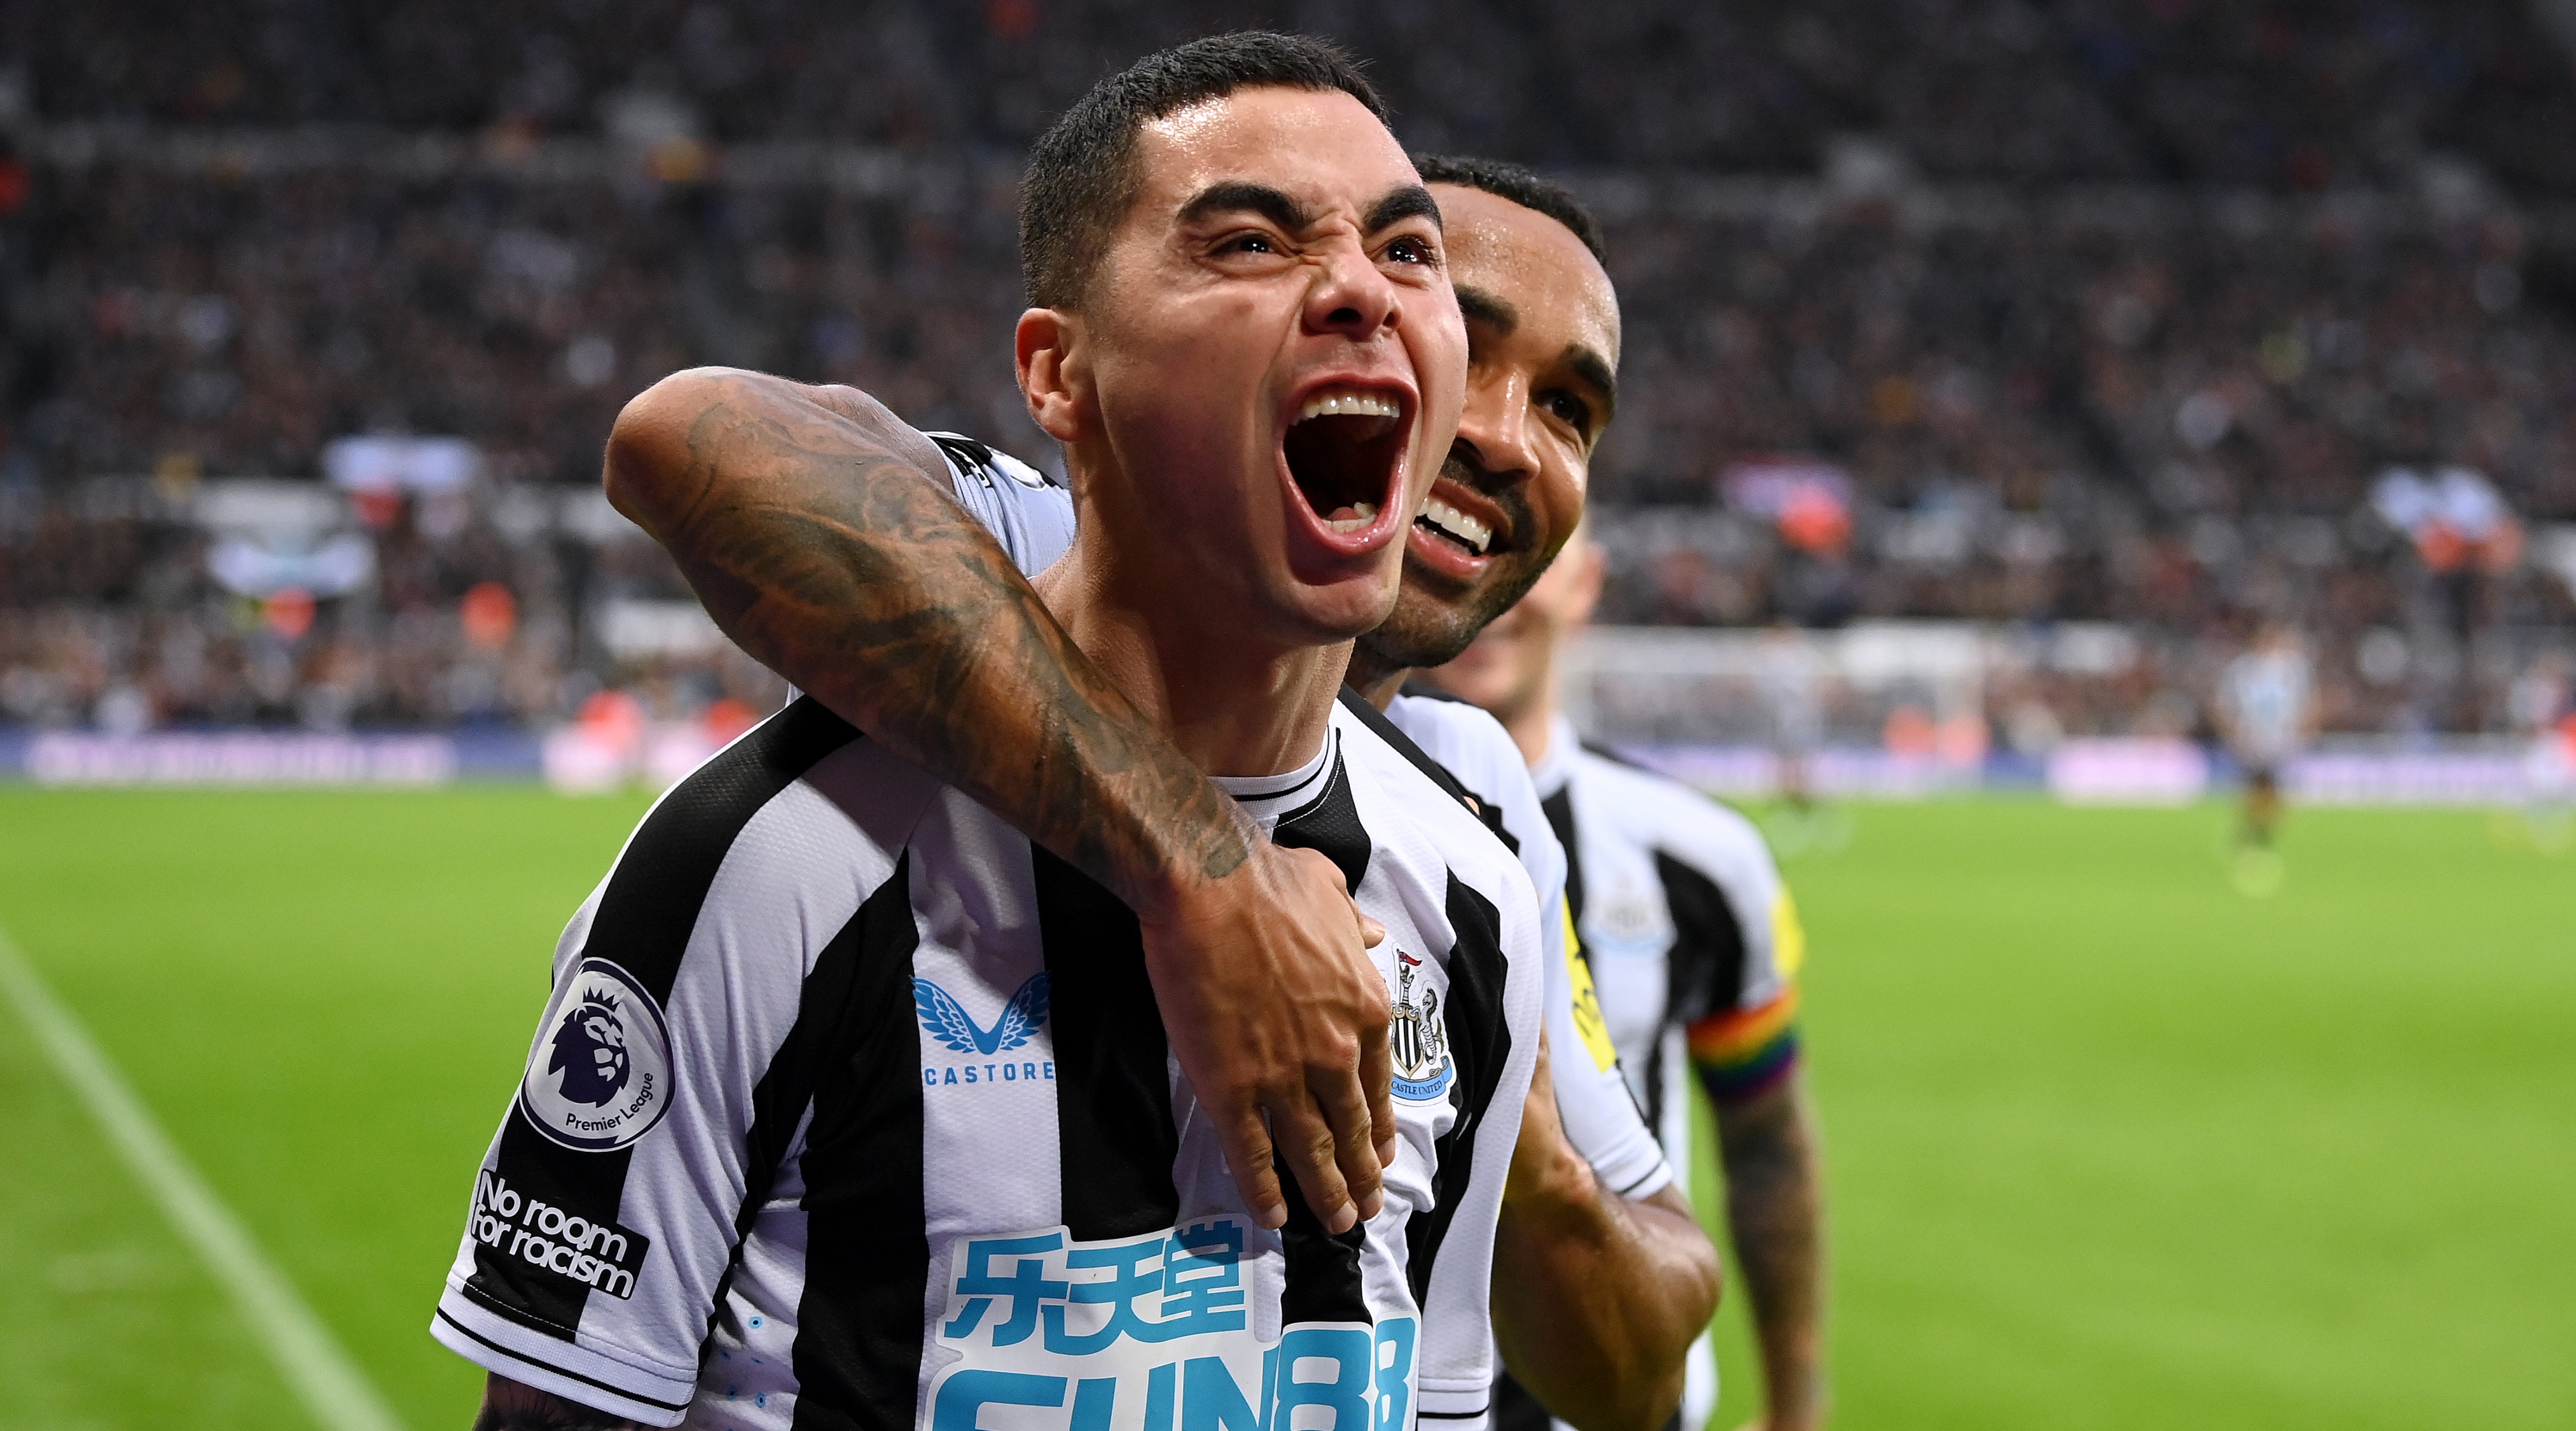 Newcastle forward Miguel Almiron celebrates with teammate Callum Wilson after scoring his team's fourth goal in the Premier League match between Newcastle United and Aston Villa on 29 October, 2022 at St. James' Park, Newcastle, United Kingdom